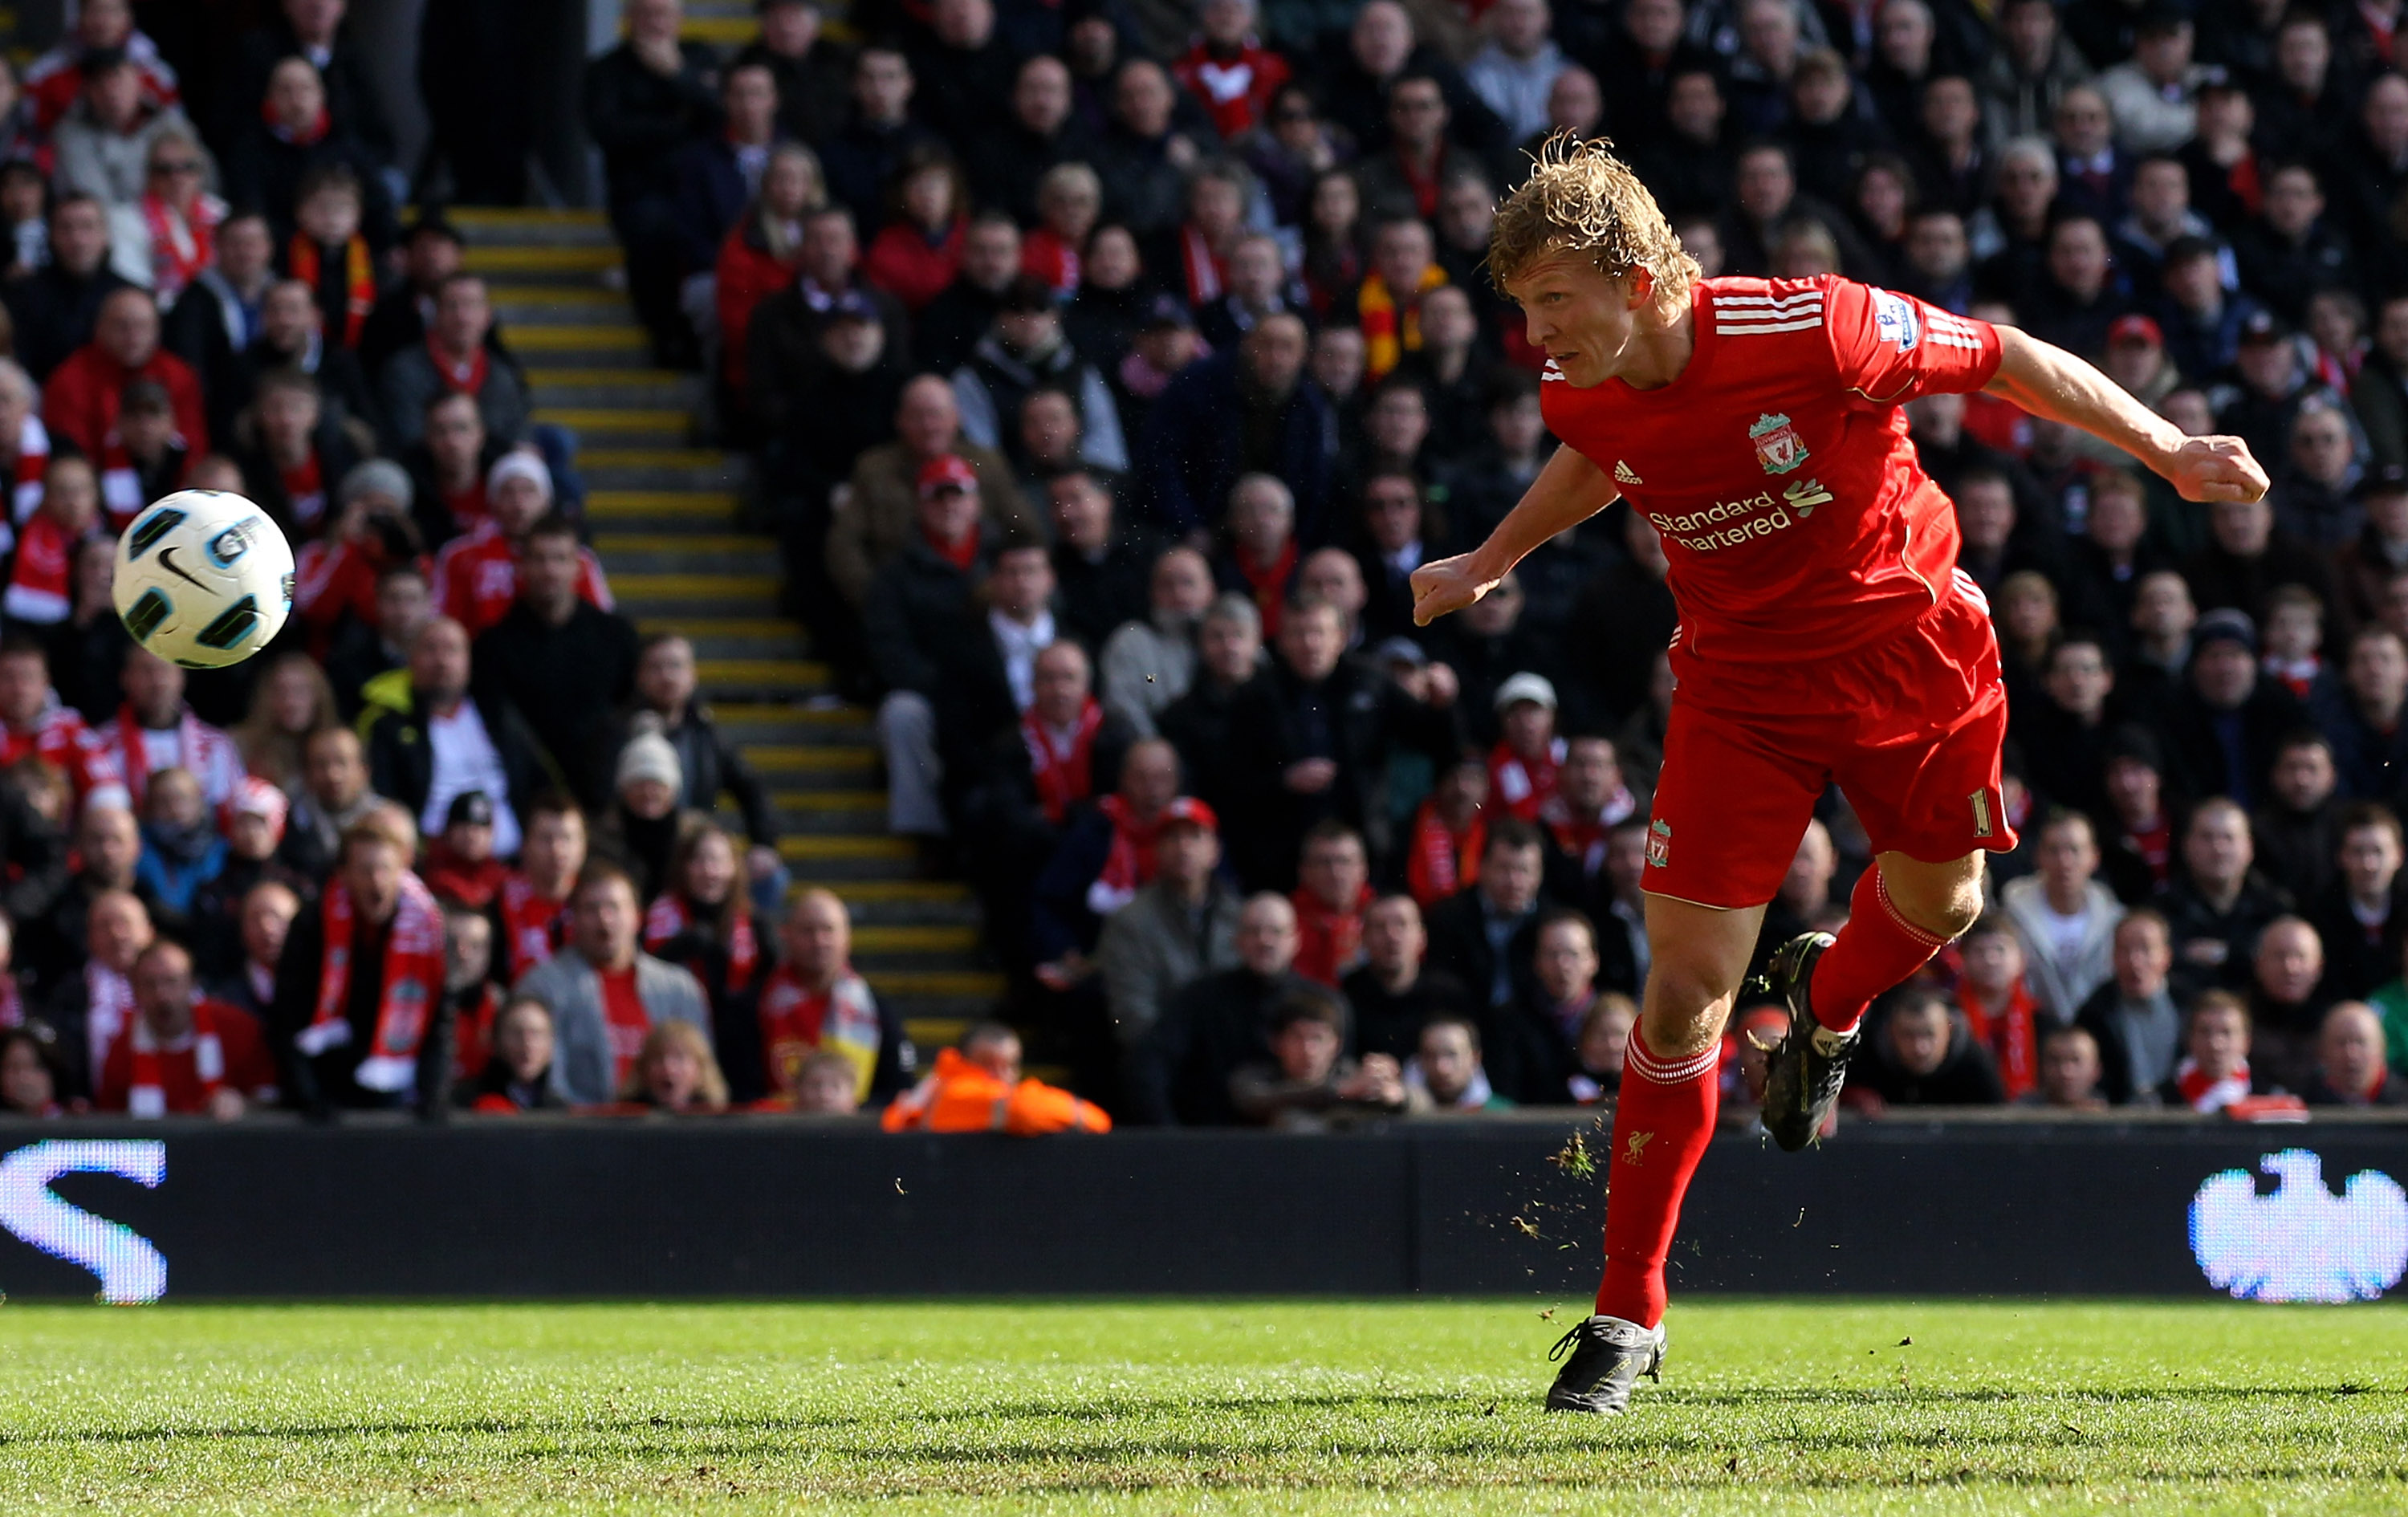 LIVERPOOL, ENGLAND - MARCH 06:  Dirk Kuyt of Liverpool scores his tem's second goal during the Barclays Premier League match between Liverpool and Manchester United at Anfield on March 6, 2011 in Liverpool, England.  (Photo by Alex Livesey/Getty Images)